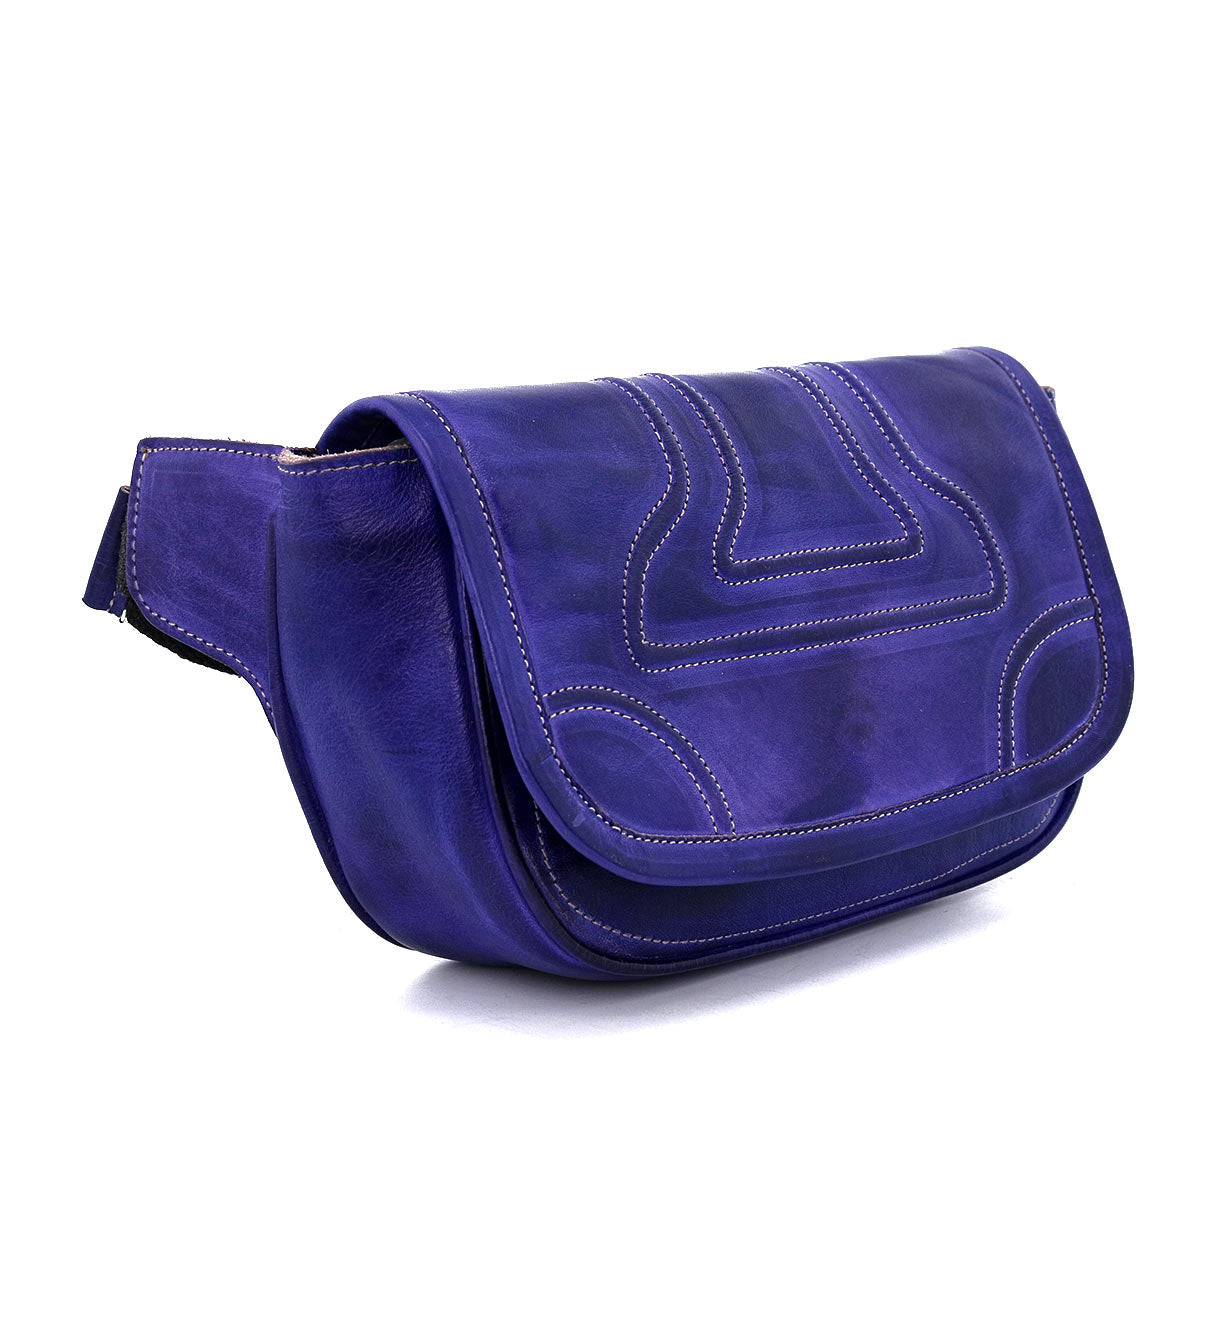 A Travers by Bed Stu purple leather belt bag on a white background.